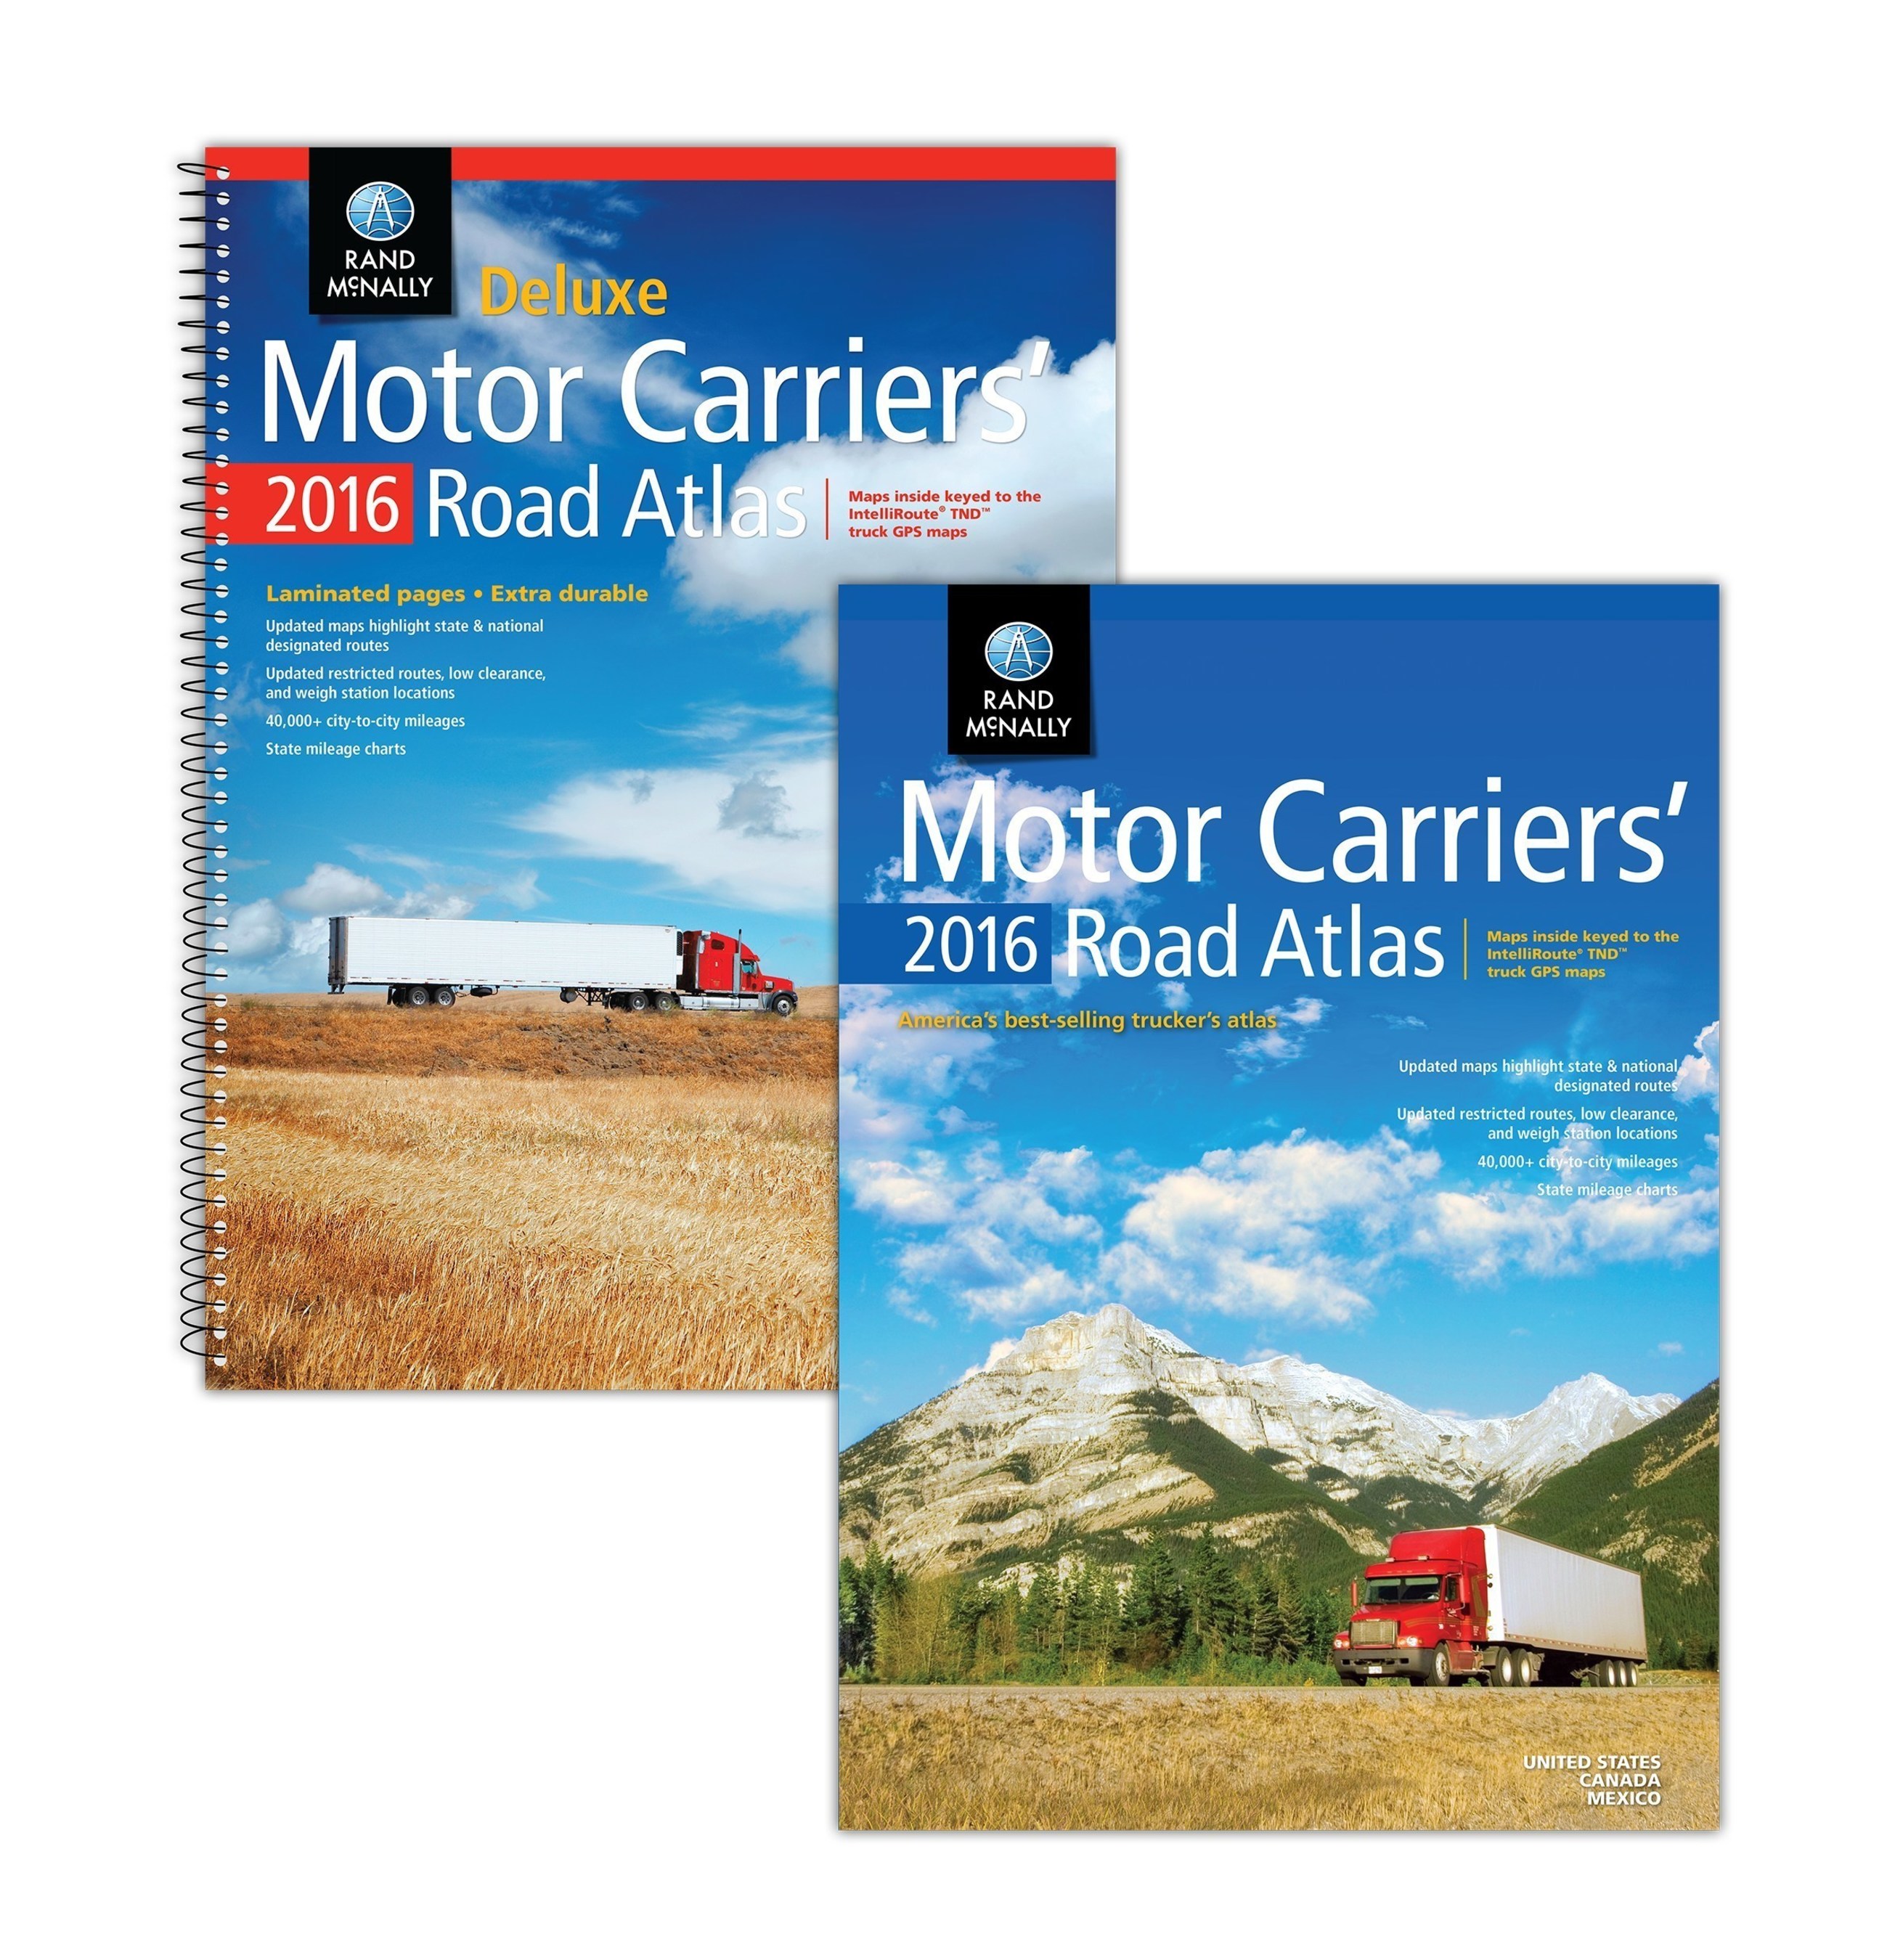 Rand McNally today released the 2016 edition of its #1-selling trucker's atlas, the Motor Carriers' Road Atlas. The printed atlas has served over-the-road professional drivers for more than 30 years.